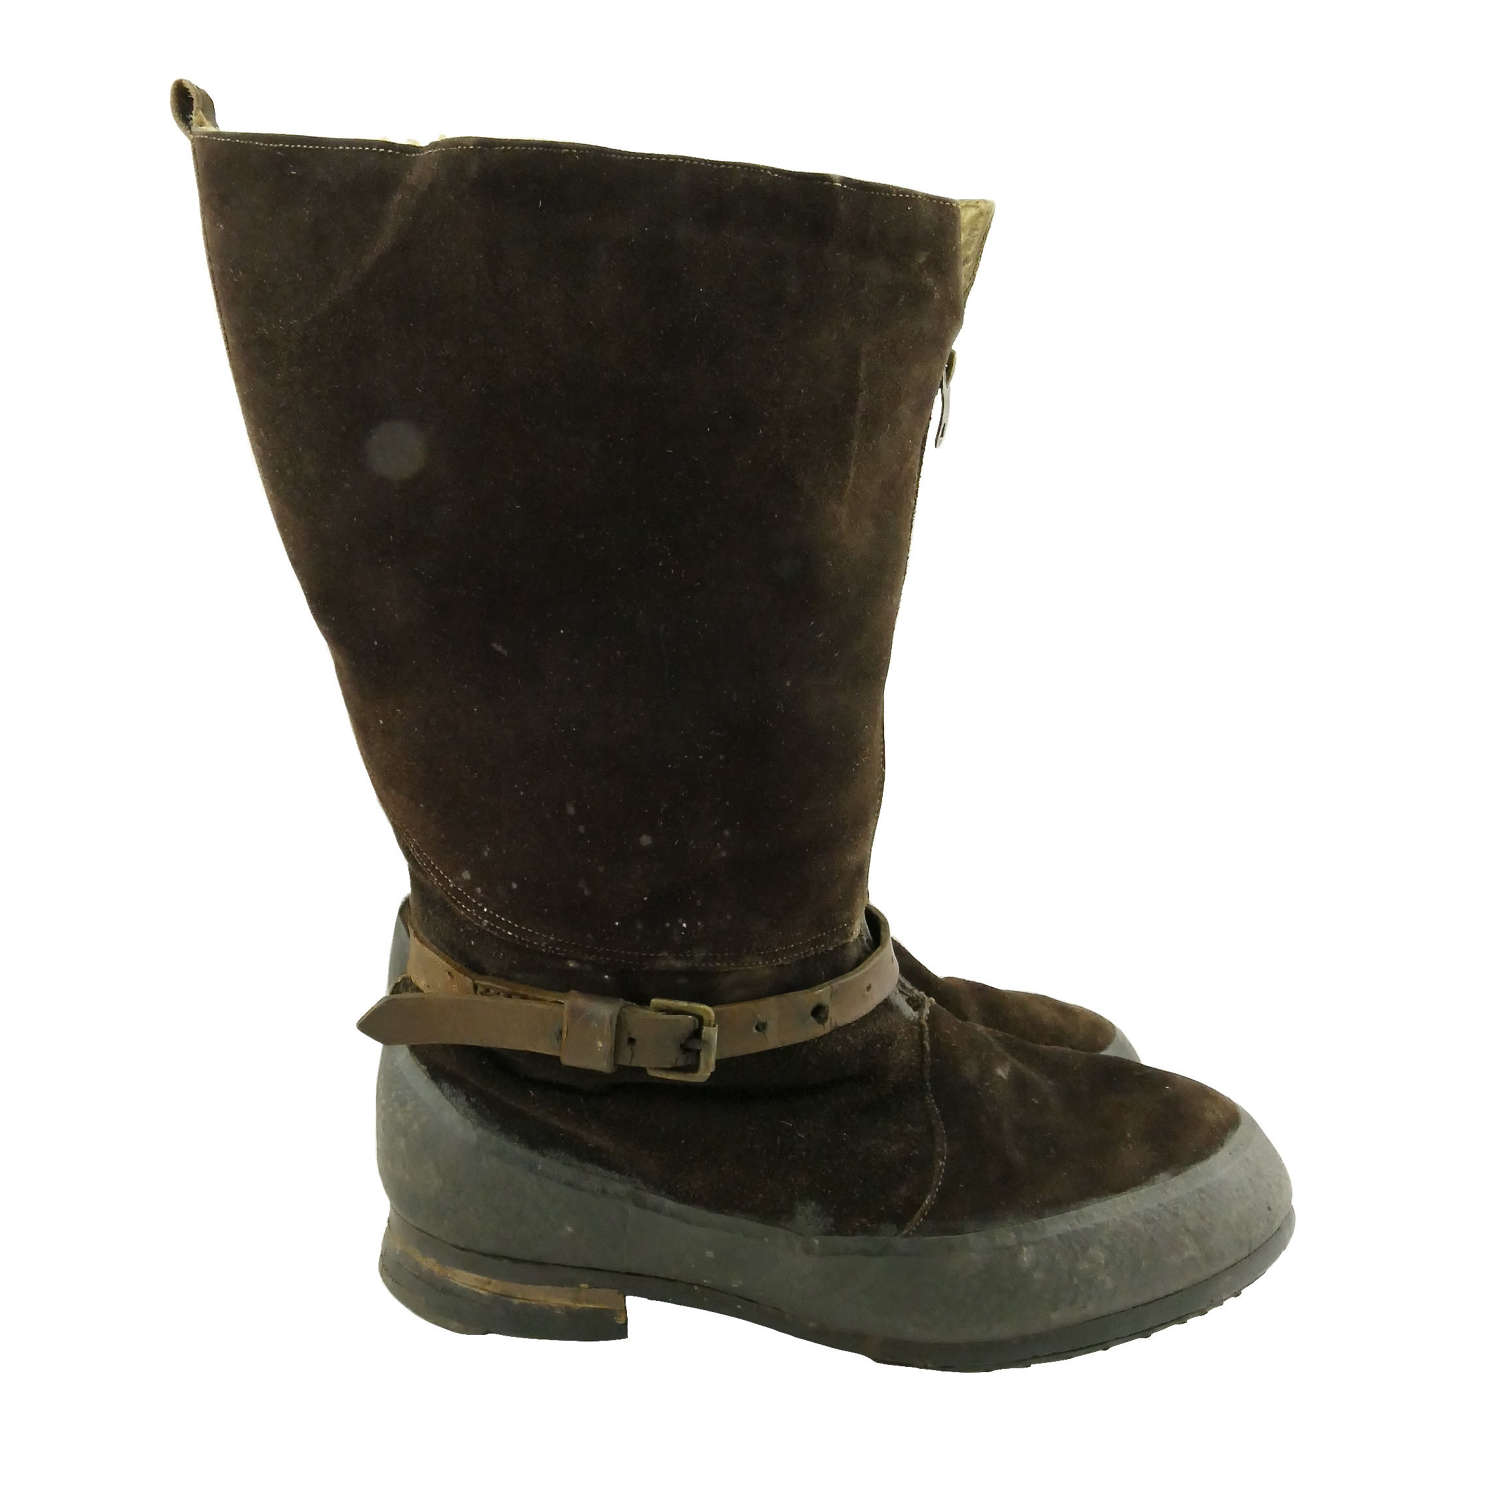 RAF 1941 pattern flying boots, S9